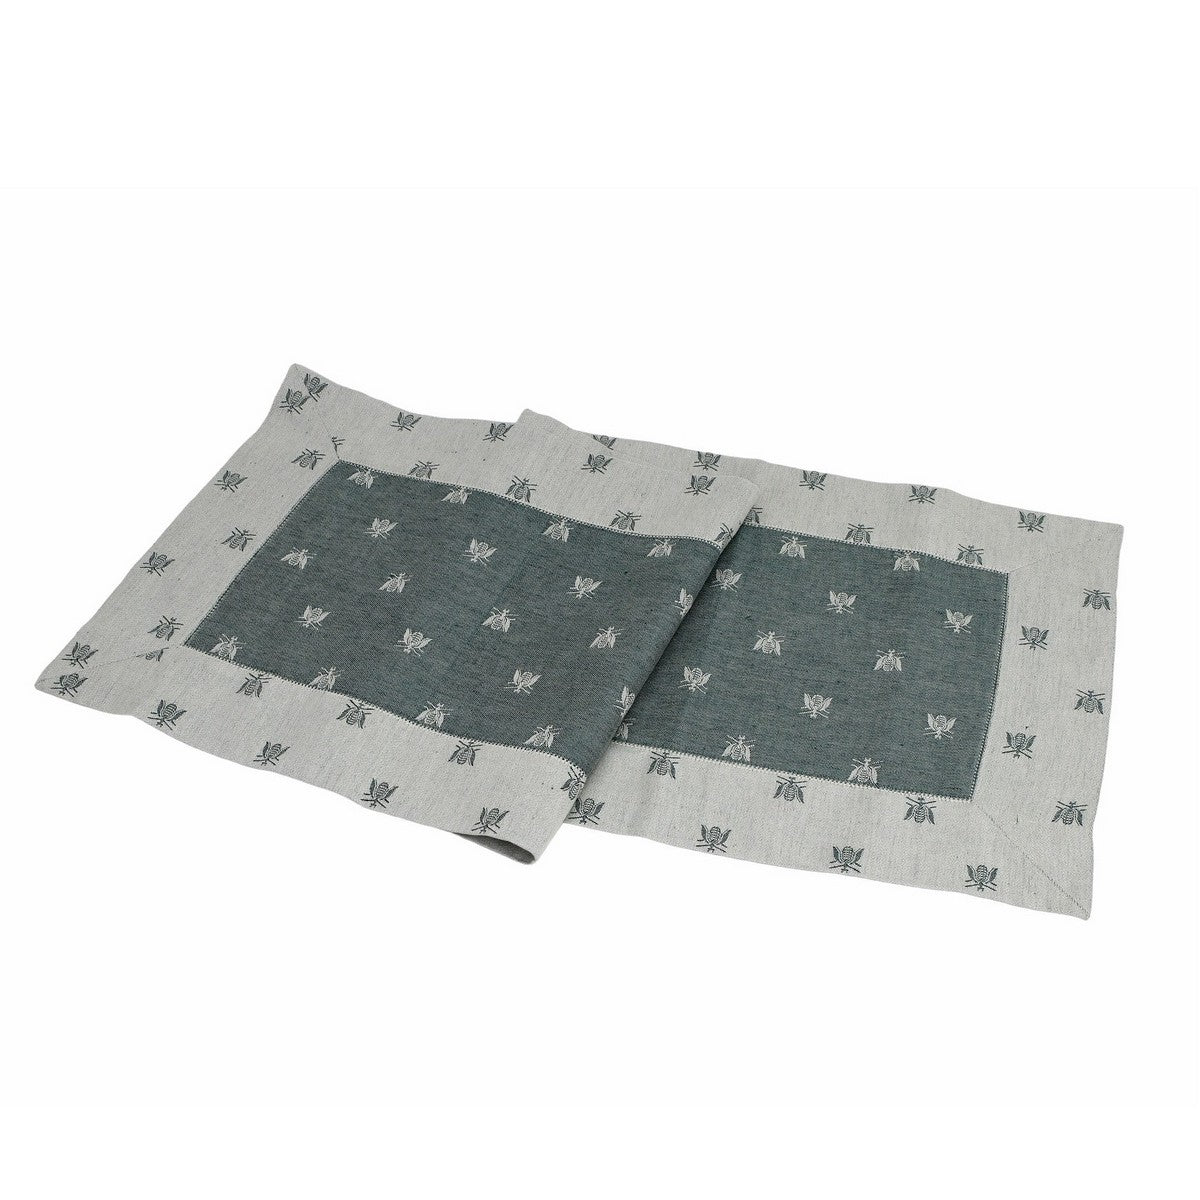 BUSATTI: Runner (60% Linen and 40% Cotton) BEES BLACK/GRAY (Reversible two tones) - Artistica.com